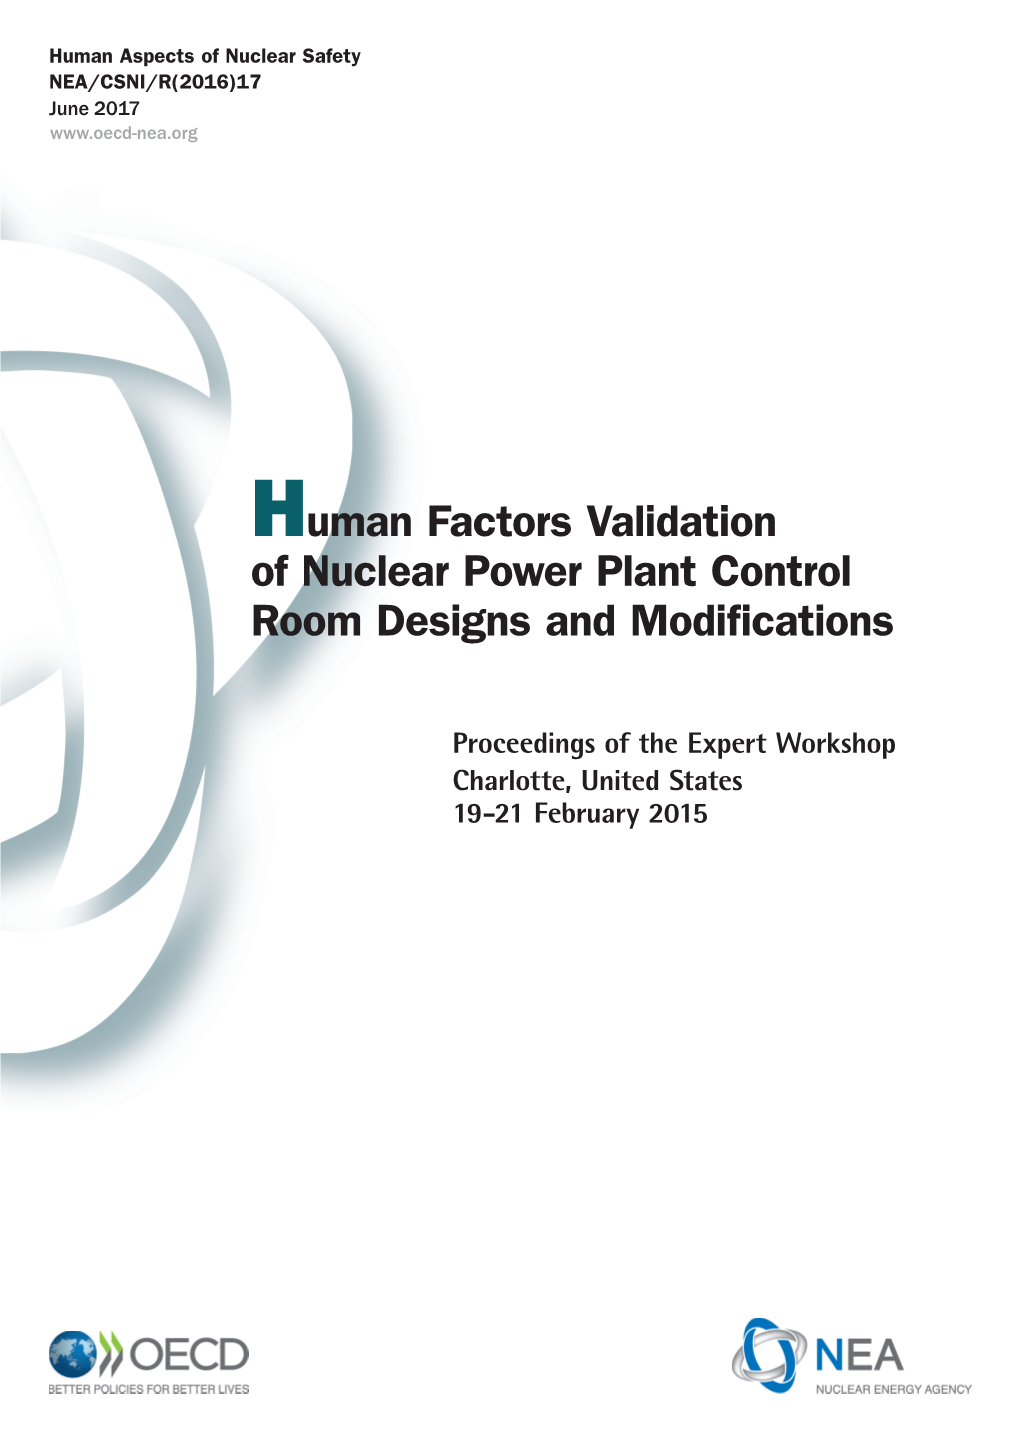 Human Factors Validation of Nuclear Power Plant Control Room Designs and Modifications